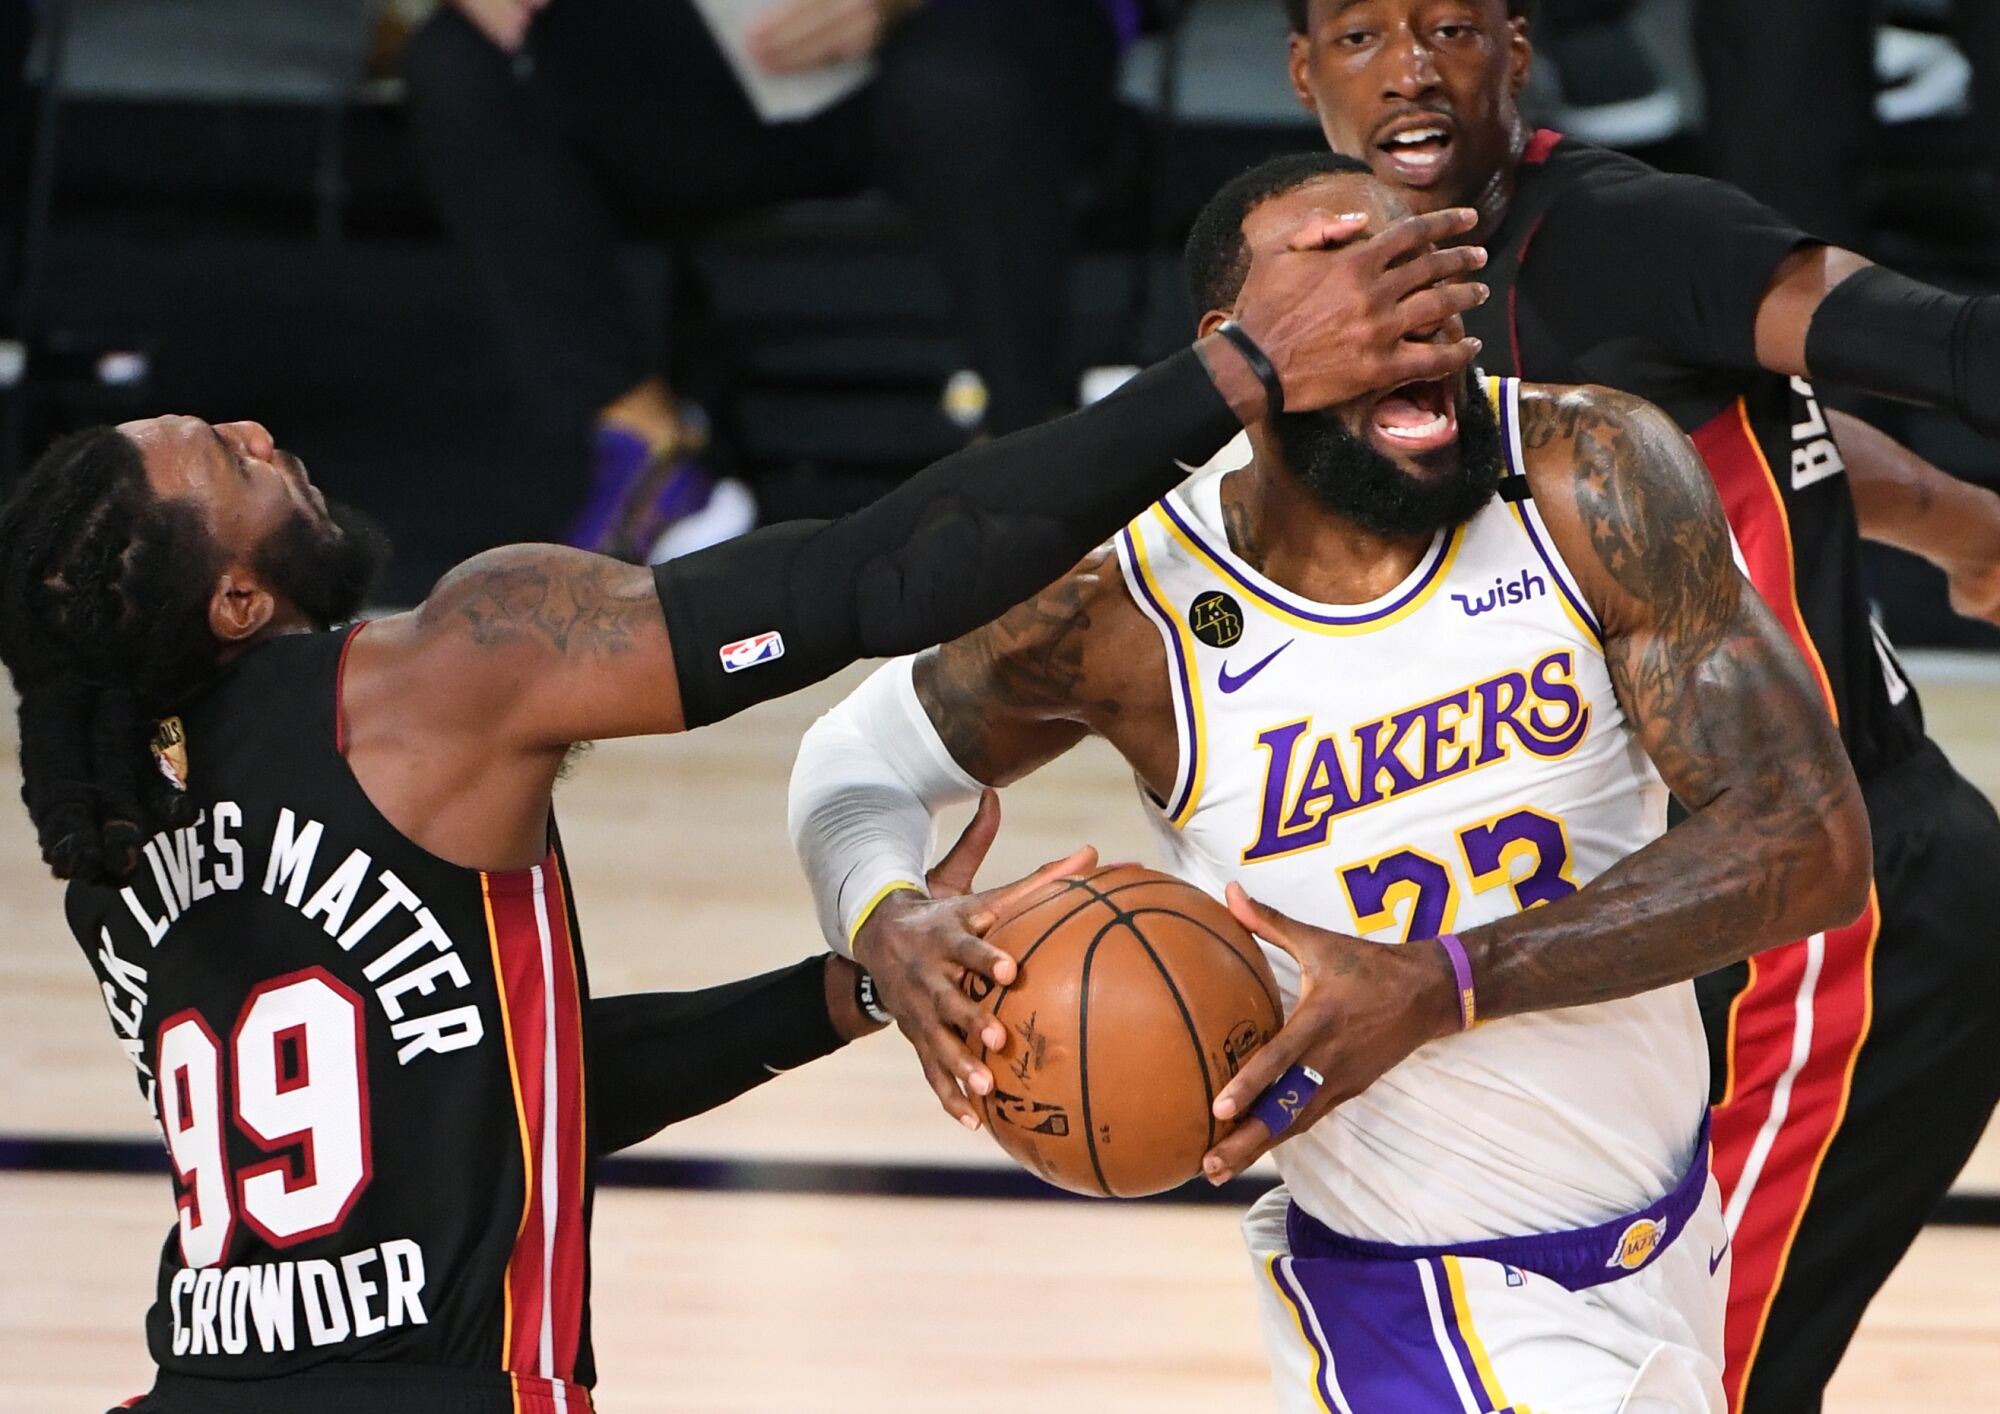 Lakers forward LeBron James is hit in the face by Miami Heat forward Jae Crowder while driving to the basket.